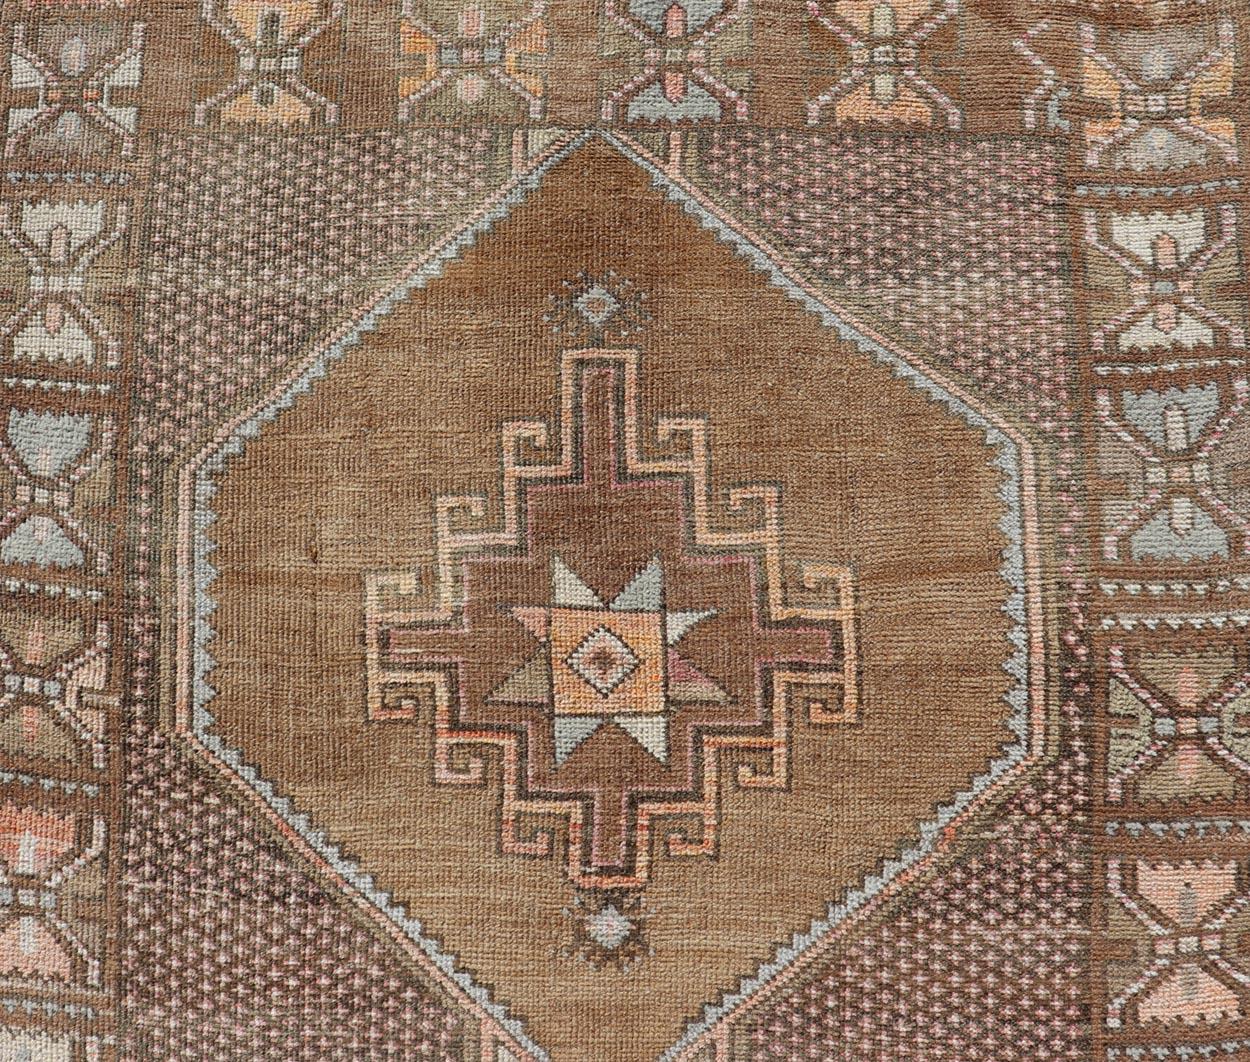 Unique & Colorful Turkish Kars Runner with Tribal Designs and Geometric Motifs For Sale 1